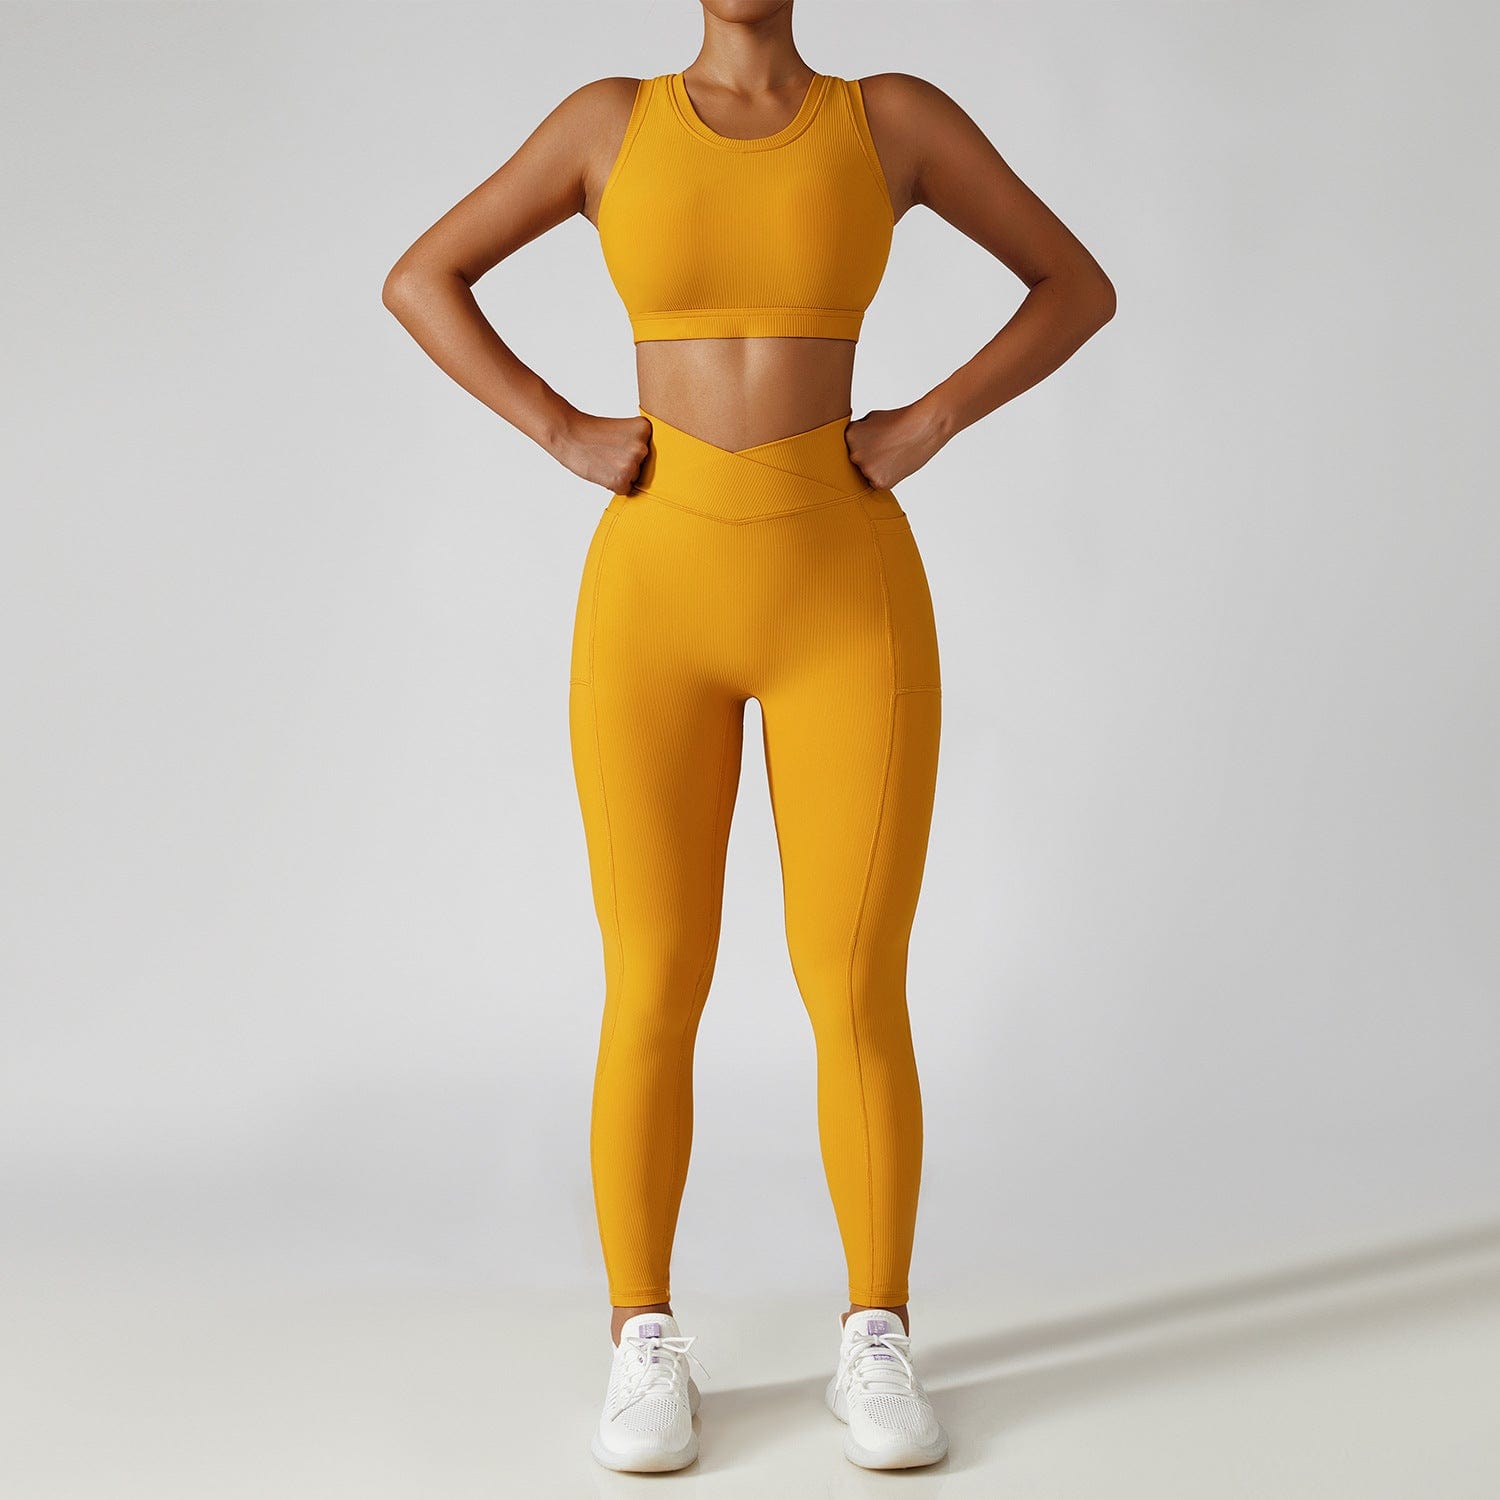 InnateFit FITNESS Curry yellow / Vest trousers / S Women's Running Fitness Suit Yoga Clothes CJTZ156149321UF